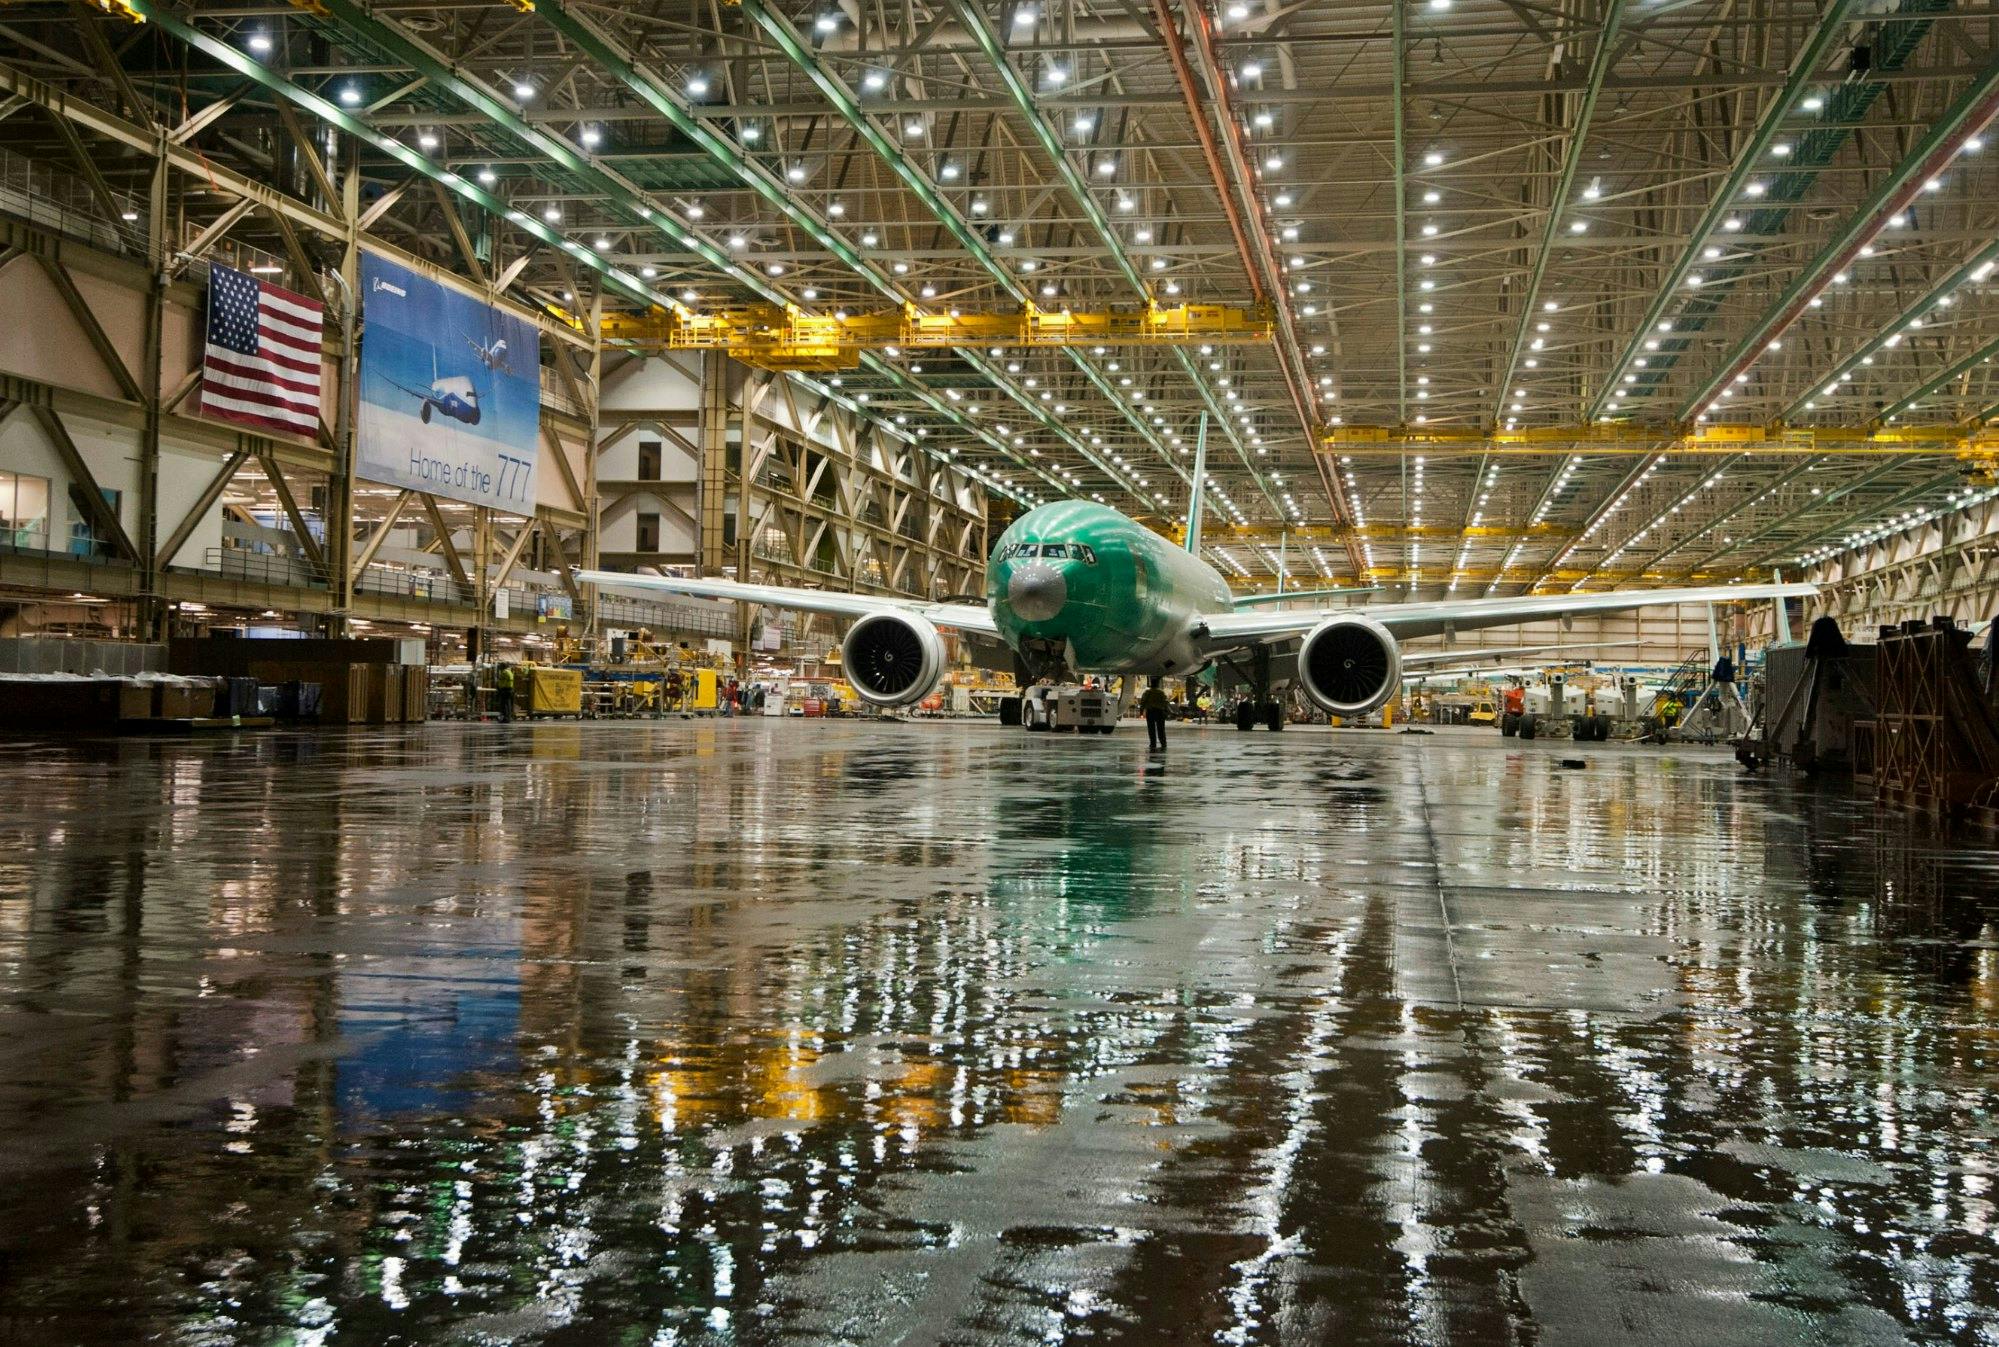 Boeing Factory and Future of Flight Aviation Center tour